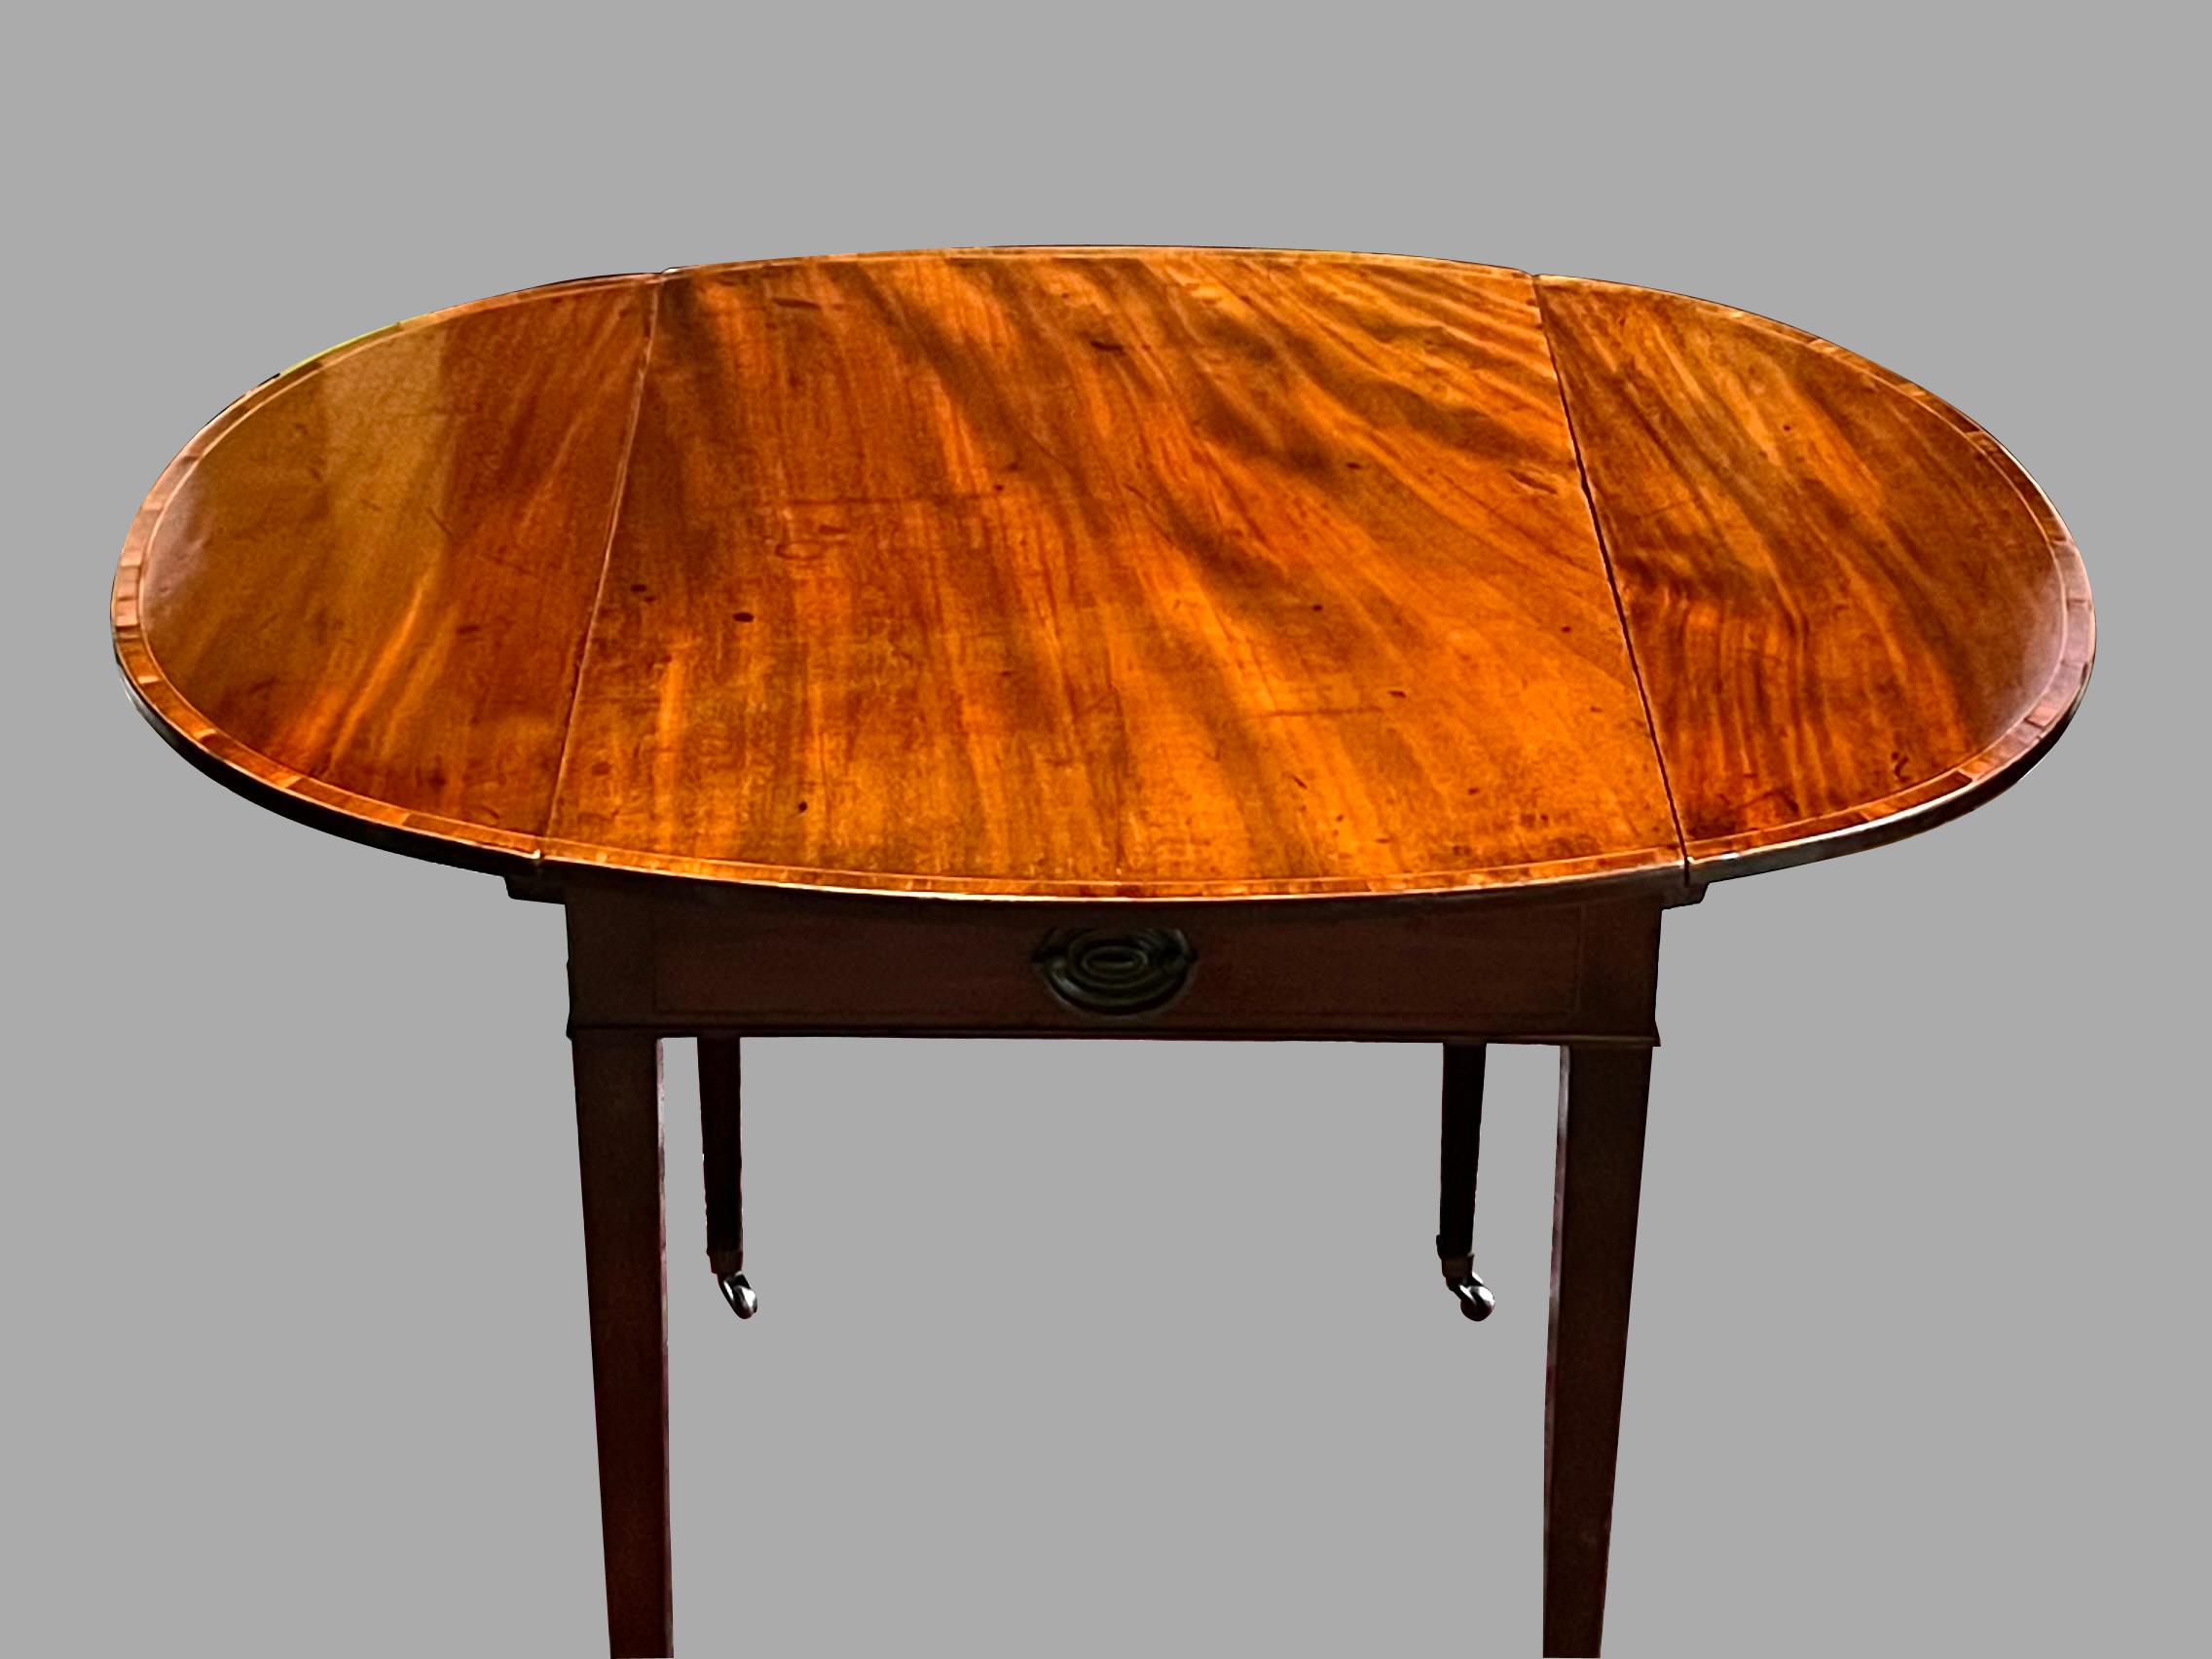 Fine English Inlaid Mahogany Hepplewhite Period Pembroke Table with Drawer For Sale 2